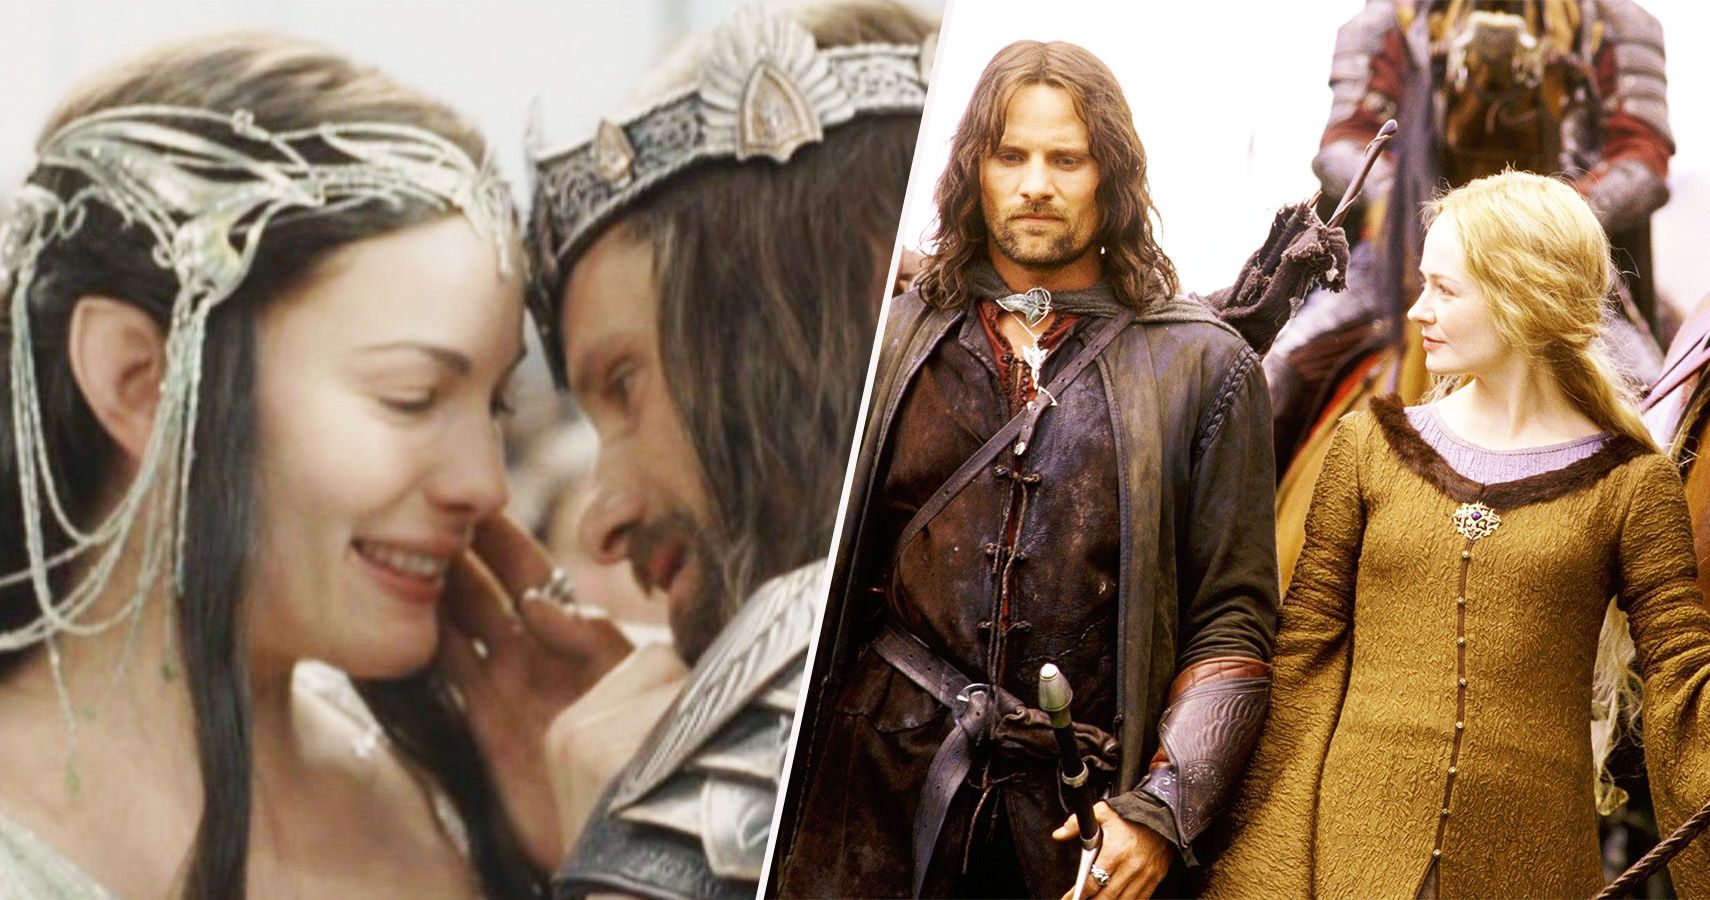 Lord of the Rings Arwen and Aragorn and aragorn and Eowyn